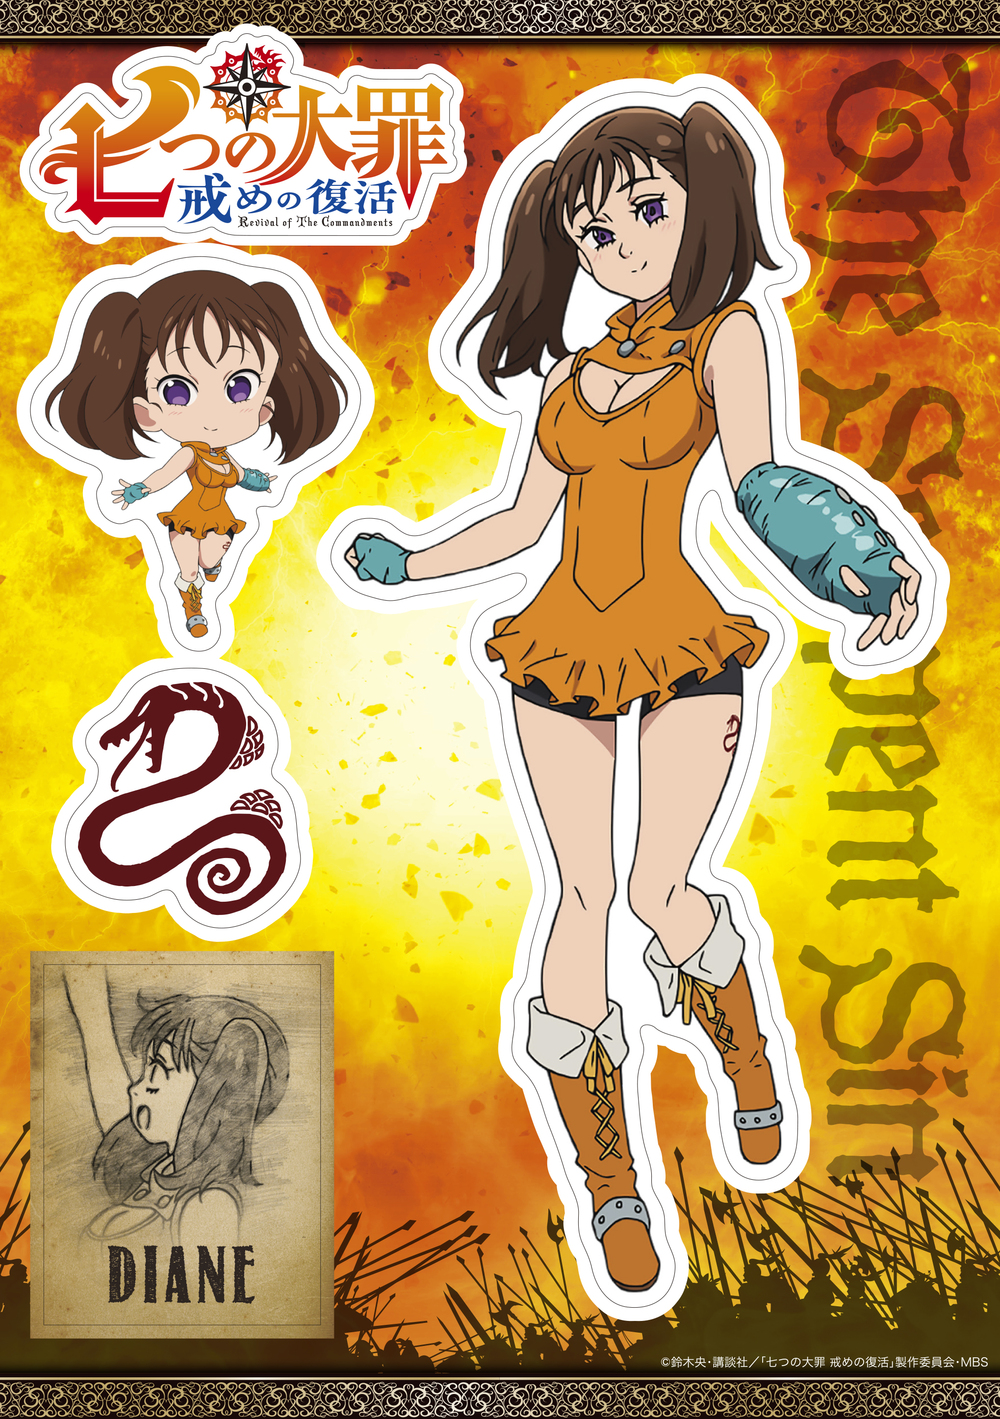 The Seven Deadly Sins Revival Of The Commandments Charapeta S Diane Set Of 3 Pieces 七つの大罪 戒めの復活 きゃらぺたs ディアンヌ Anime Goods Commodity Goods Groceries